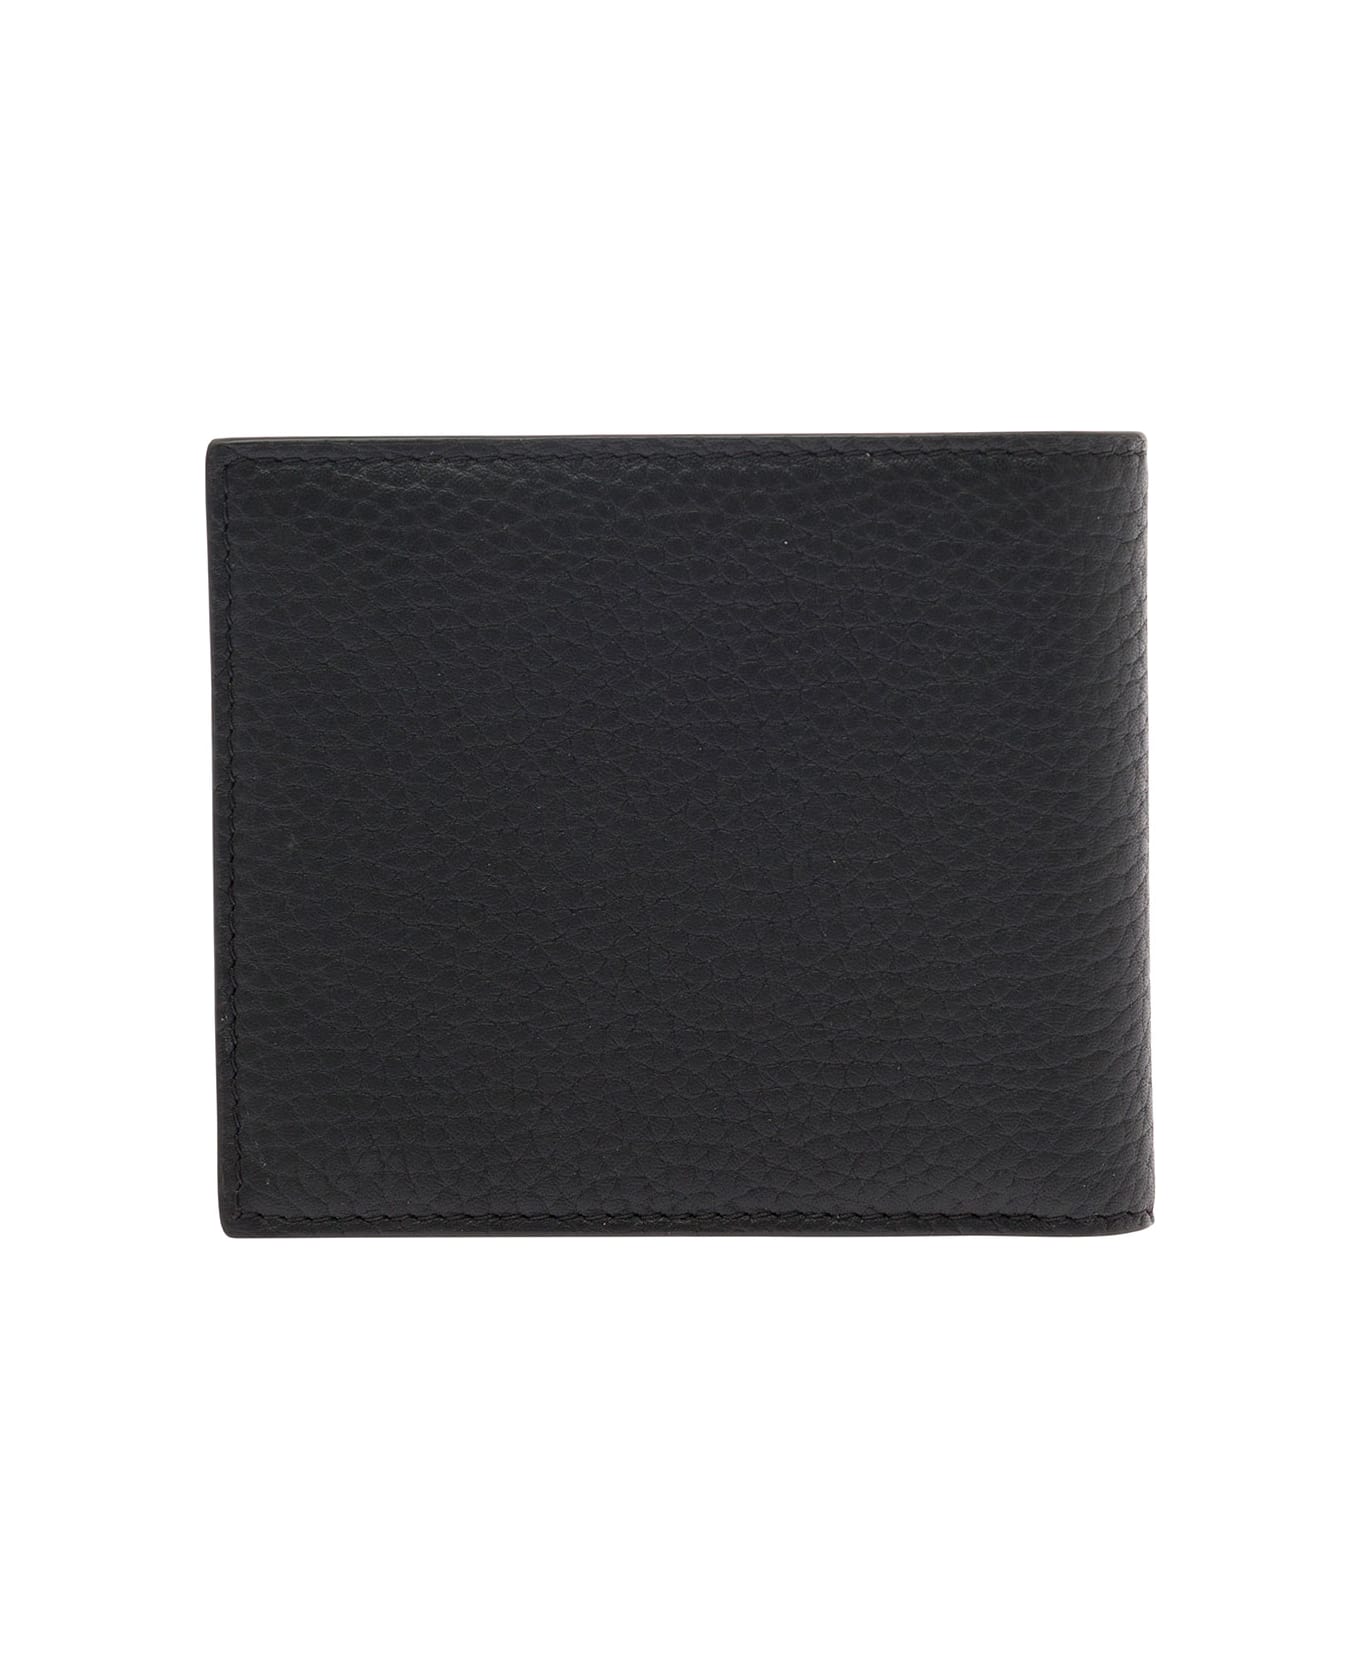 Dolce & Gabbana Black Bifold Wallet With Quilted Leather In Leather Man - Black 財布